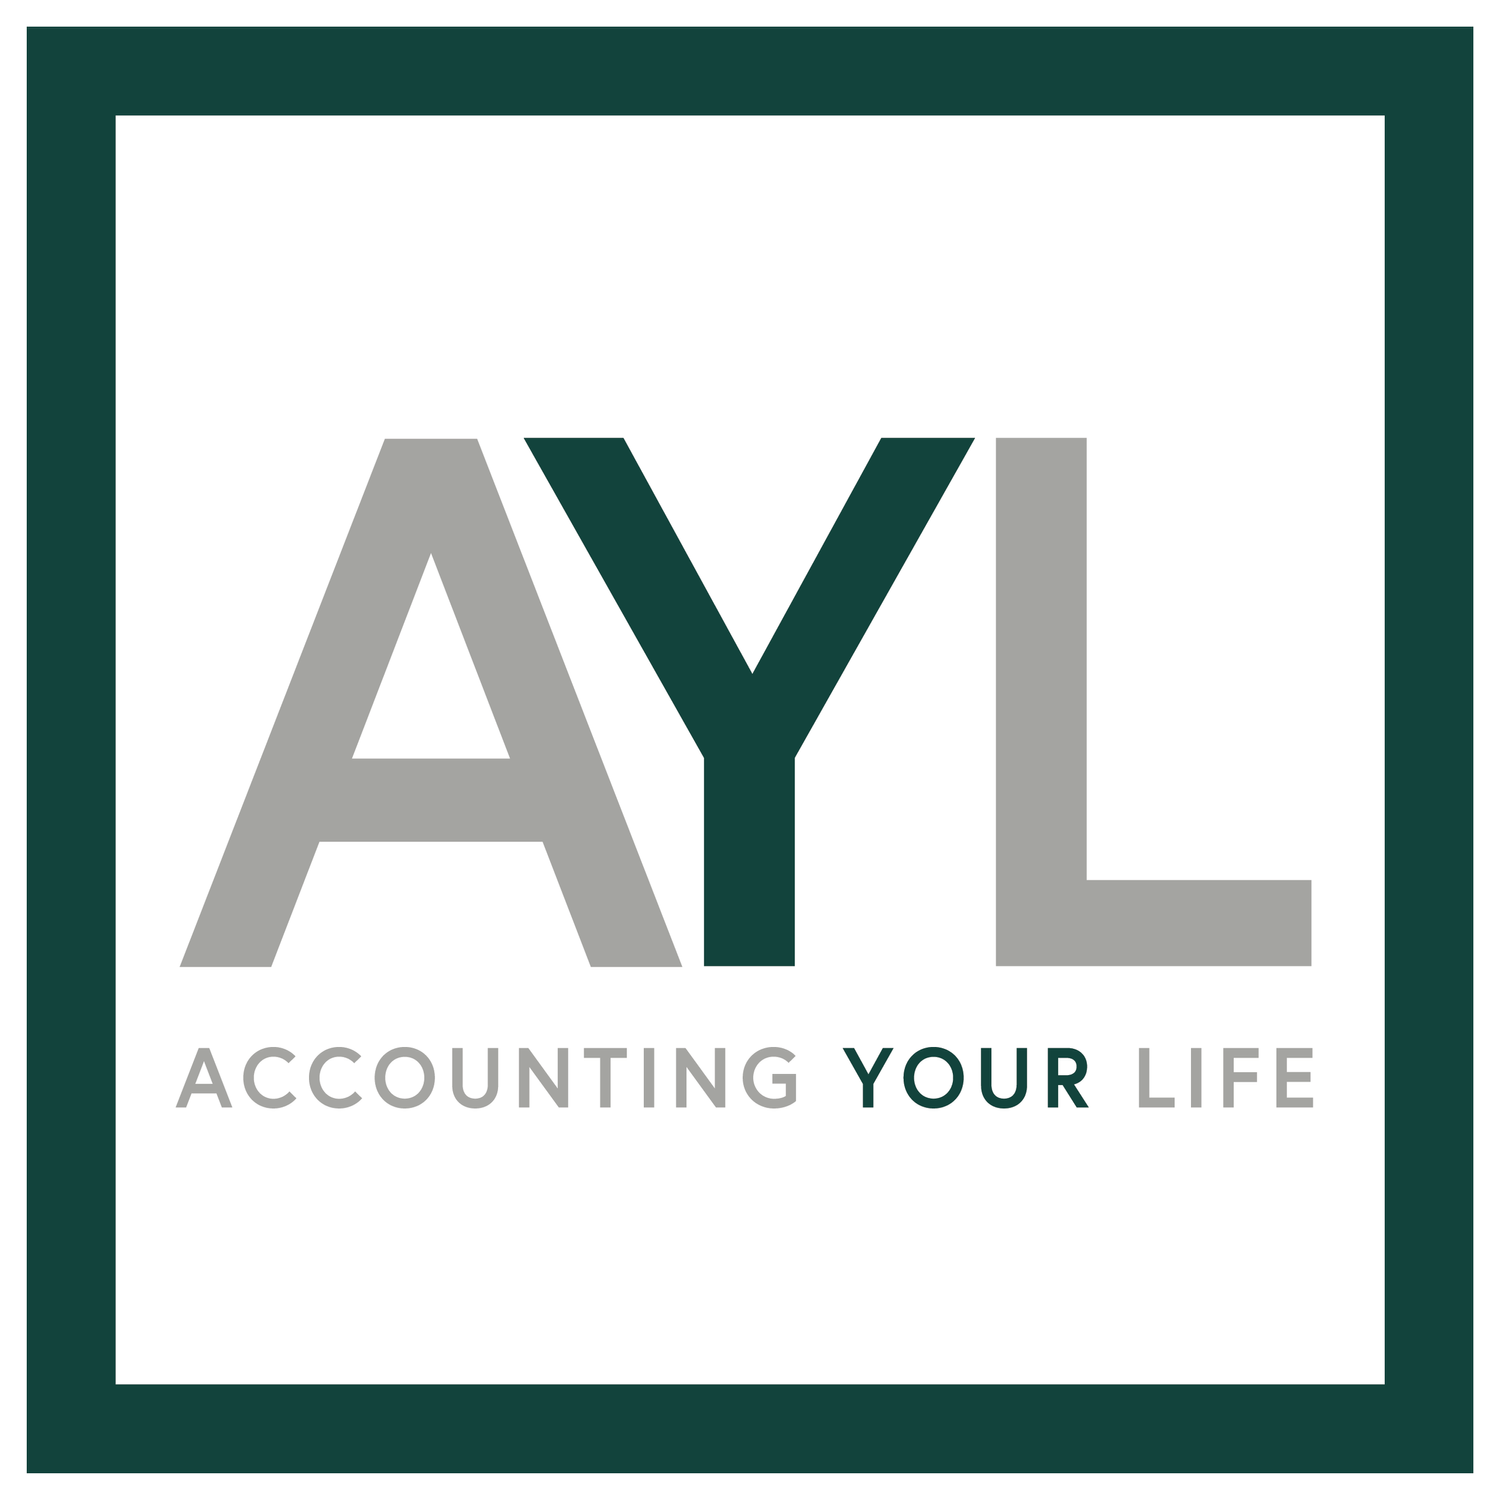 Accounting Your Life